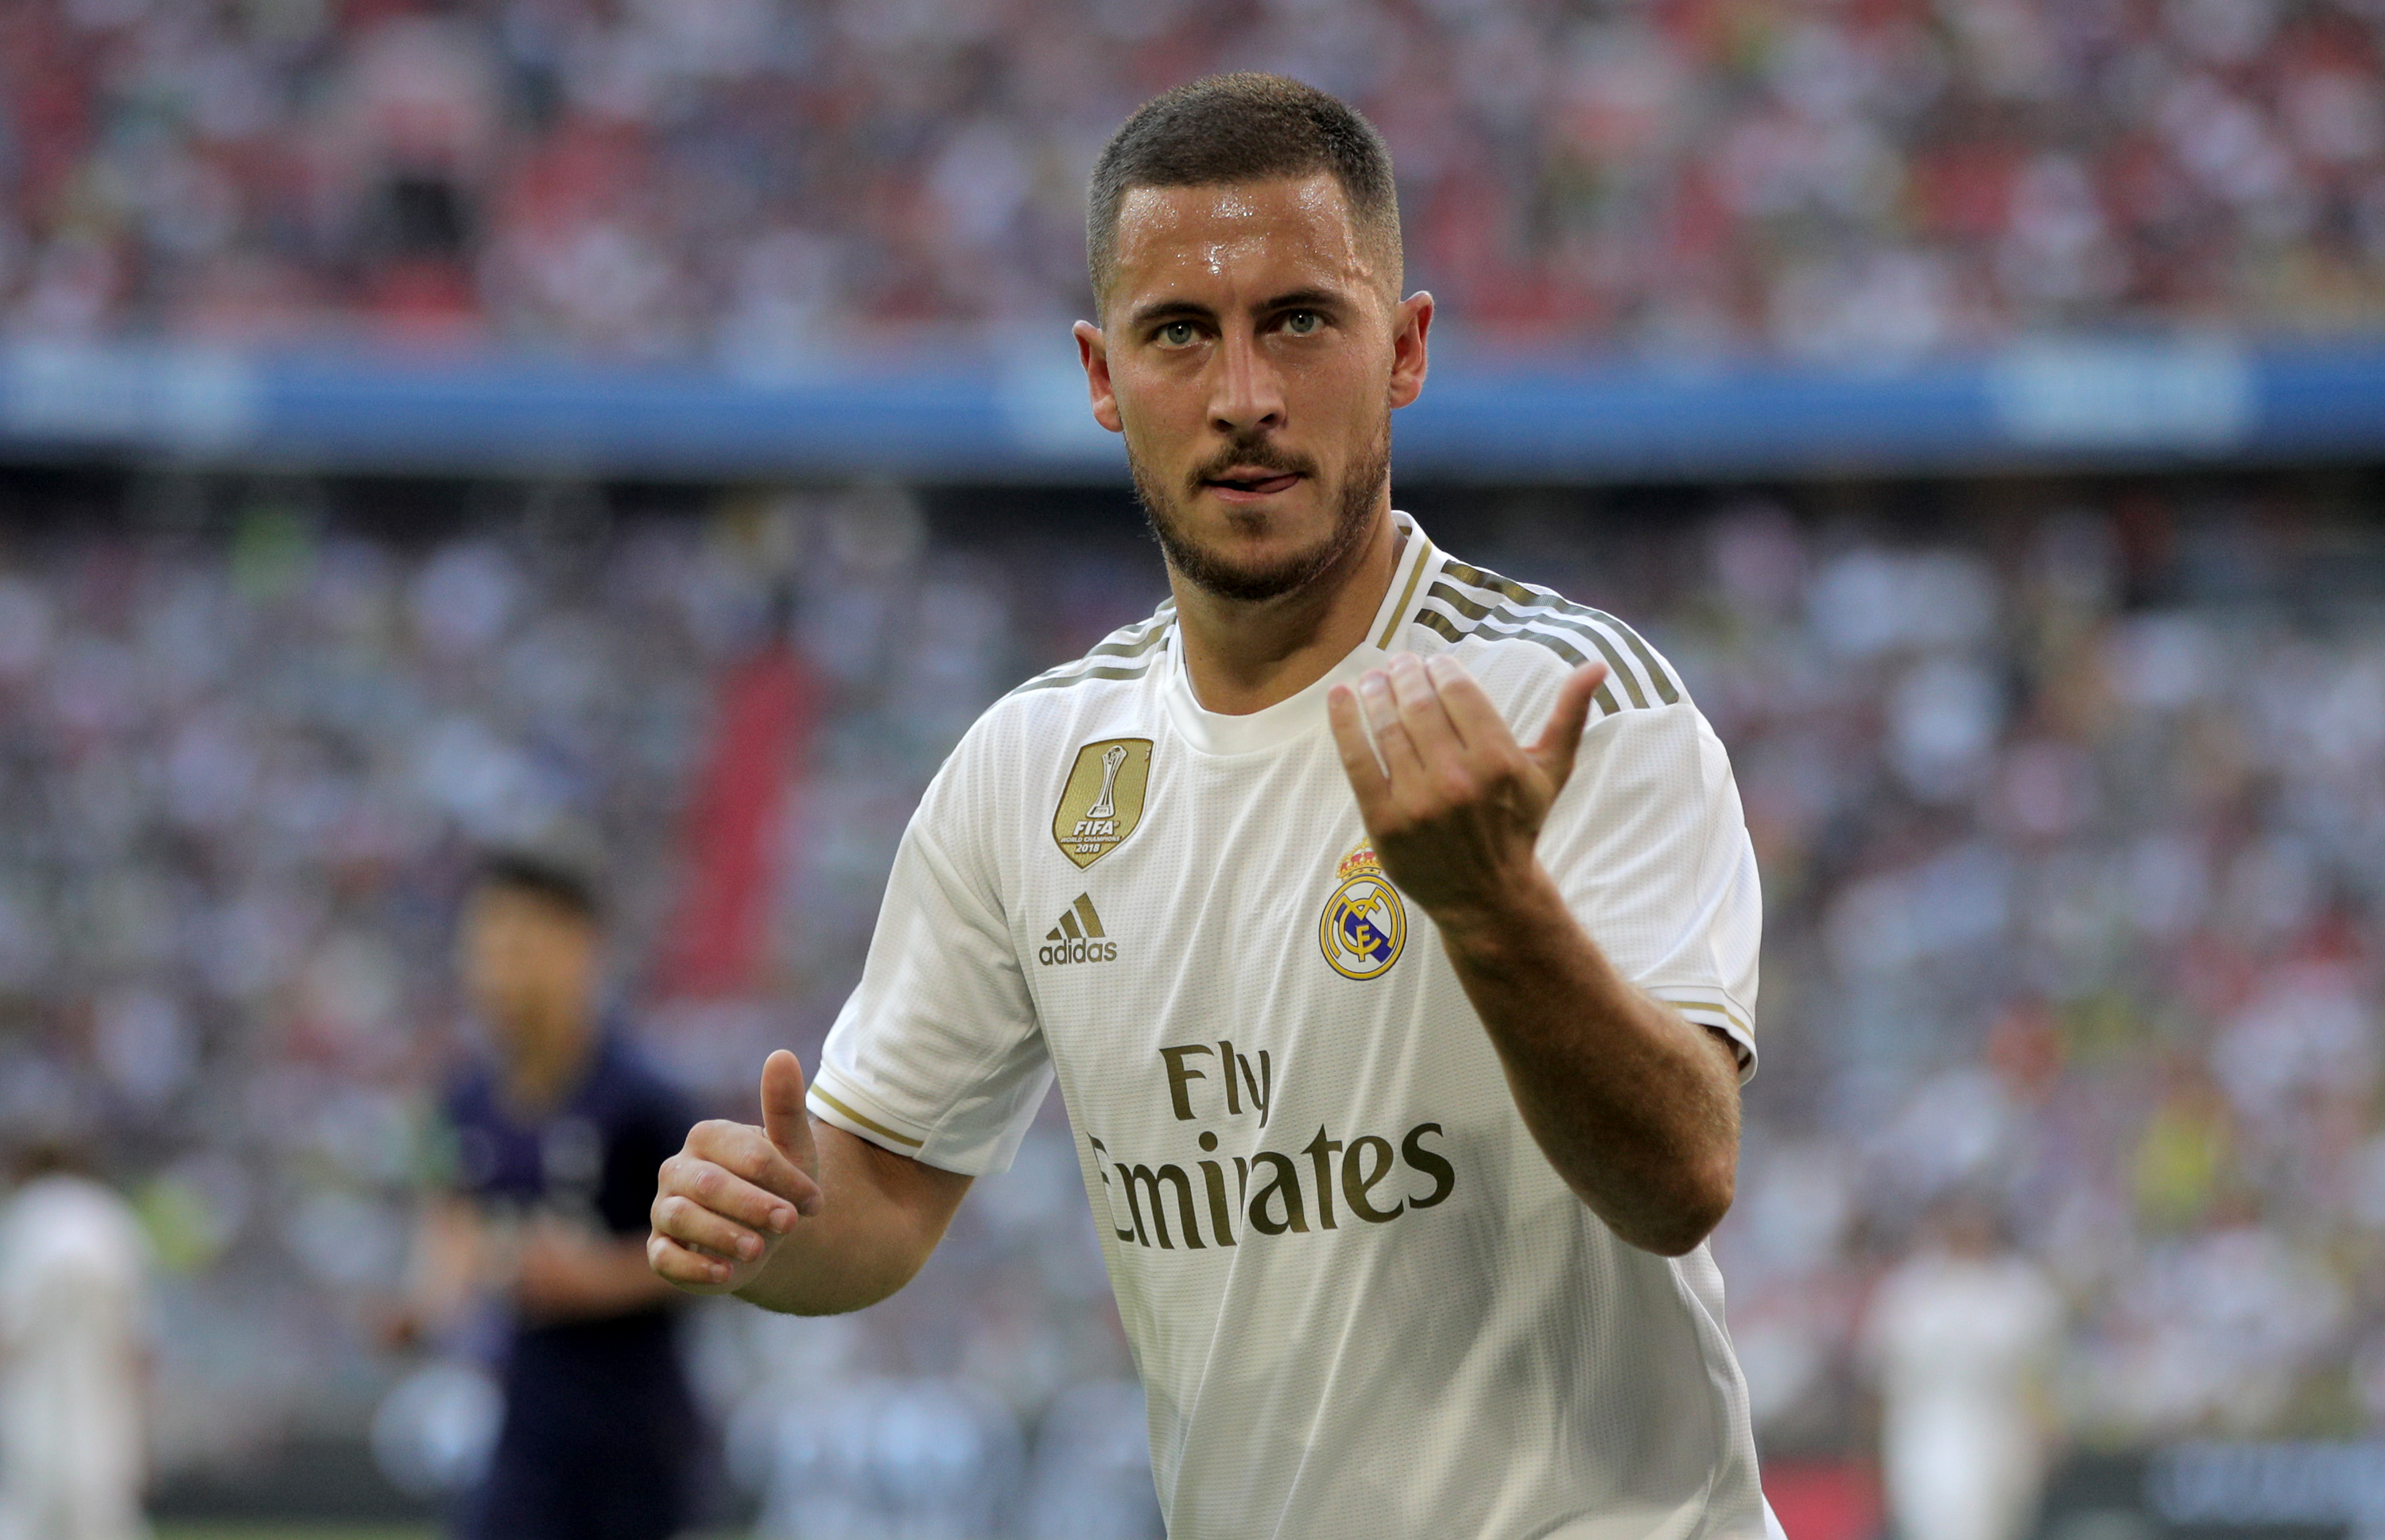 MUNICH, GERMANY - JULY 30: Eden Hazard of Madrid looks on during the Audi Cup 2019 semi final match between Real Madrid and Tottenham Hotspur at Allianz Arena on July 30, 2019 in Munich, Germany. (Photo by Adam Pretty/Bongarts/Getty Images)